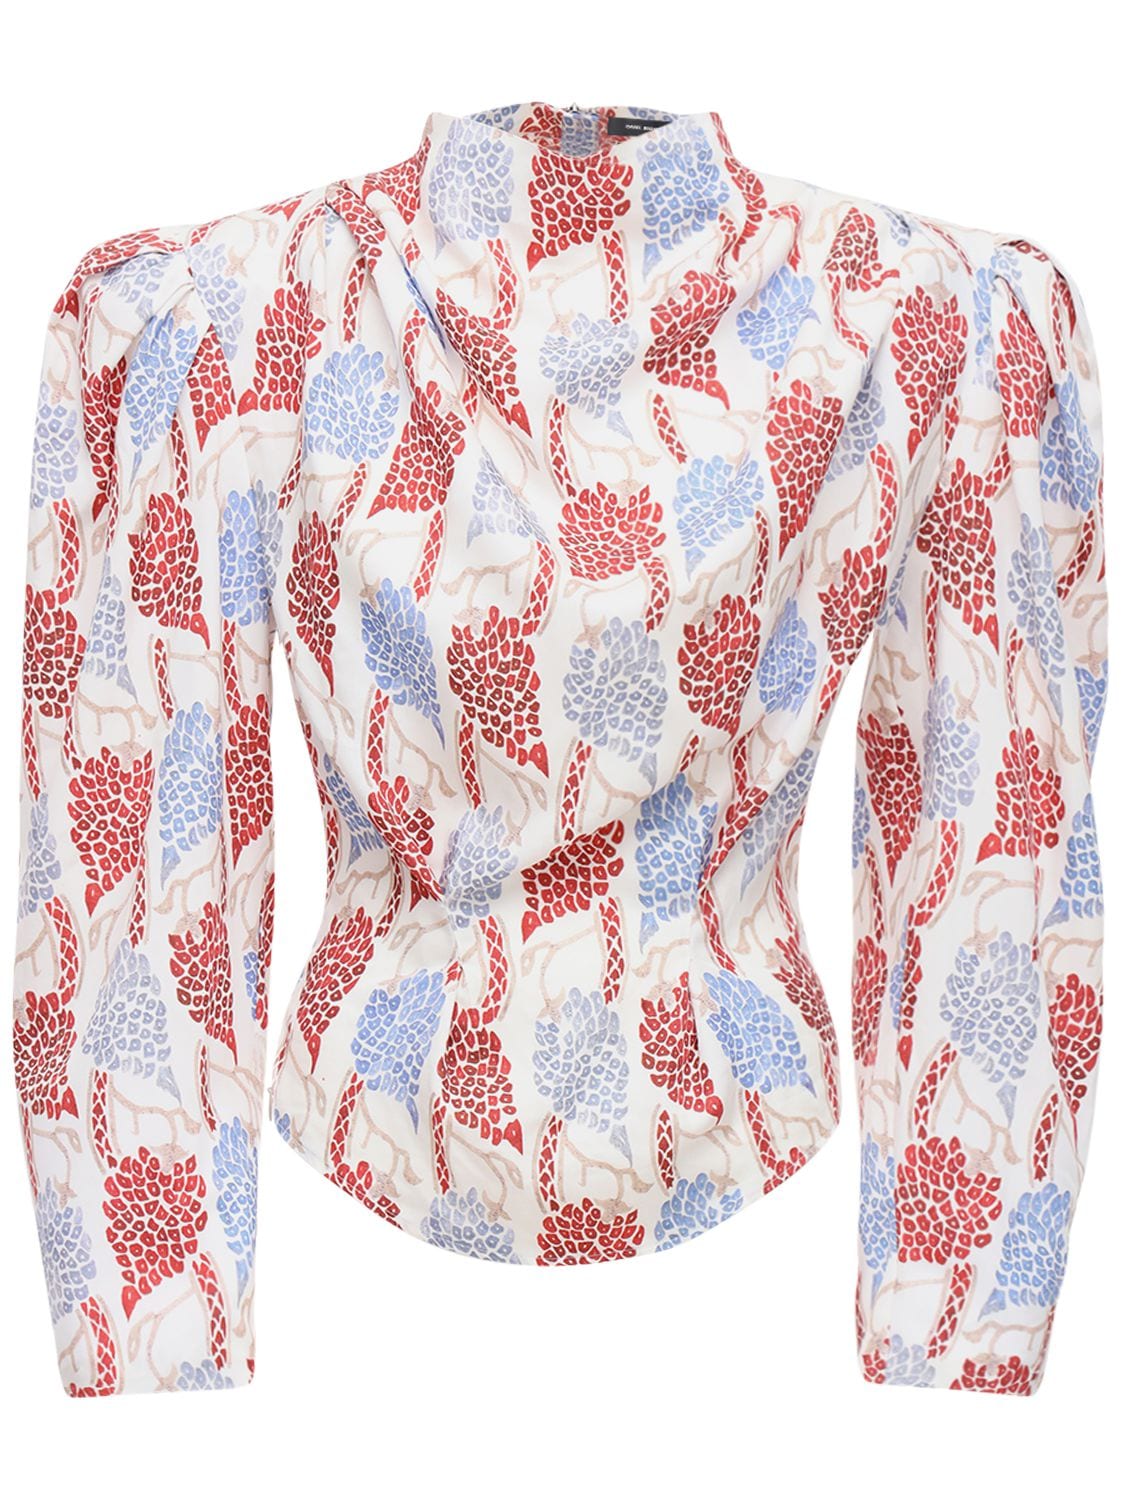 Isabel Marant Bayani Floral Print Top In Multi,red